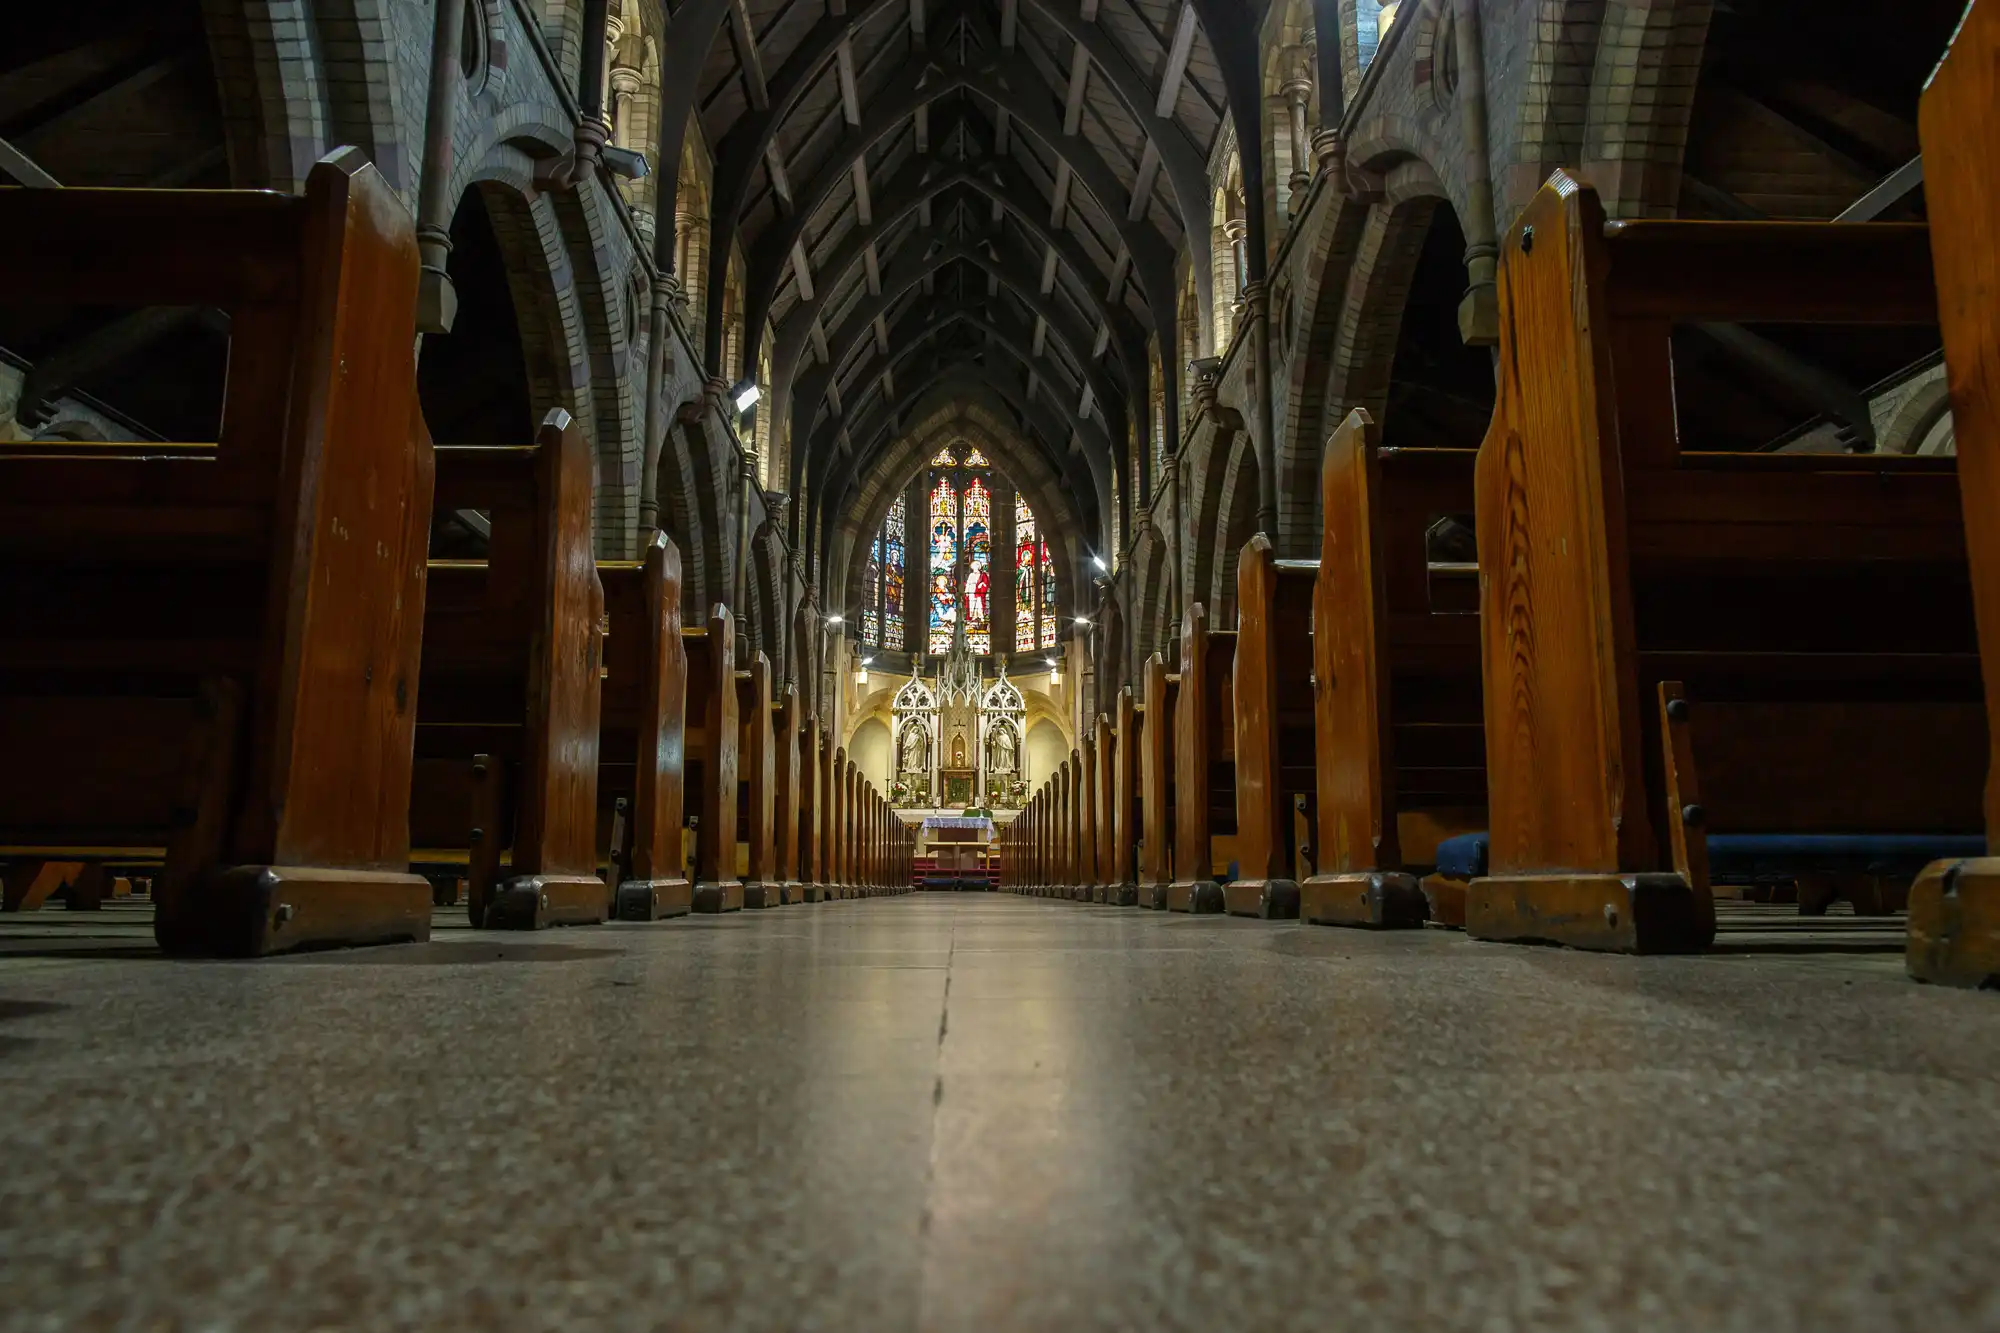 Low-angle view inside a cathedral, showcasing rows of wooden pews leading to an ornate altar and a stained glass window.